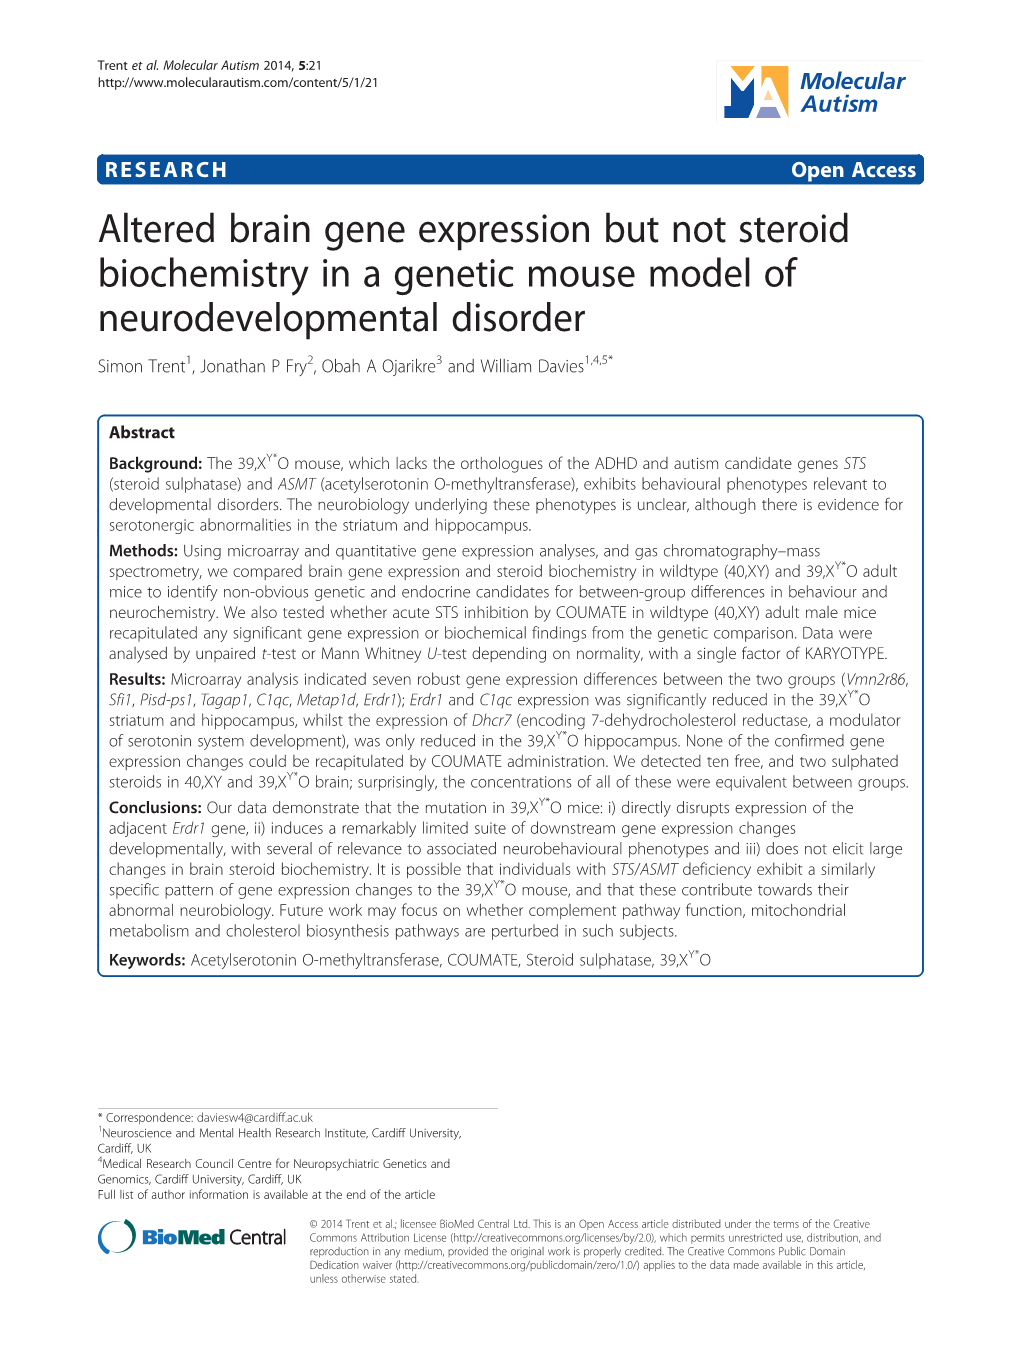 Altered Brain Gene Expression but Not Steroid Biochemistry in a Genetic